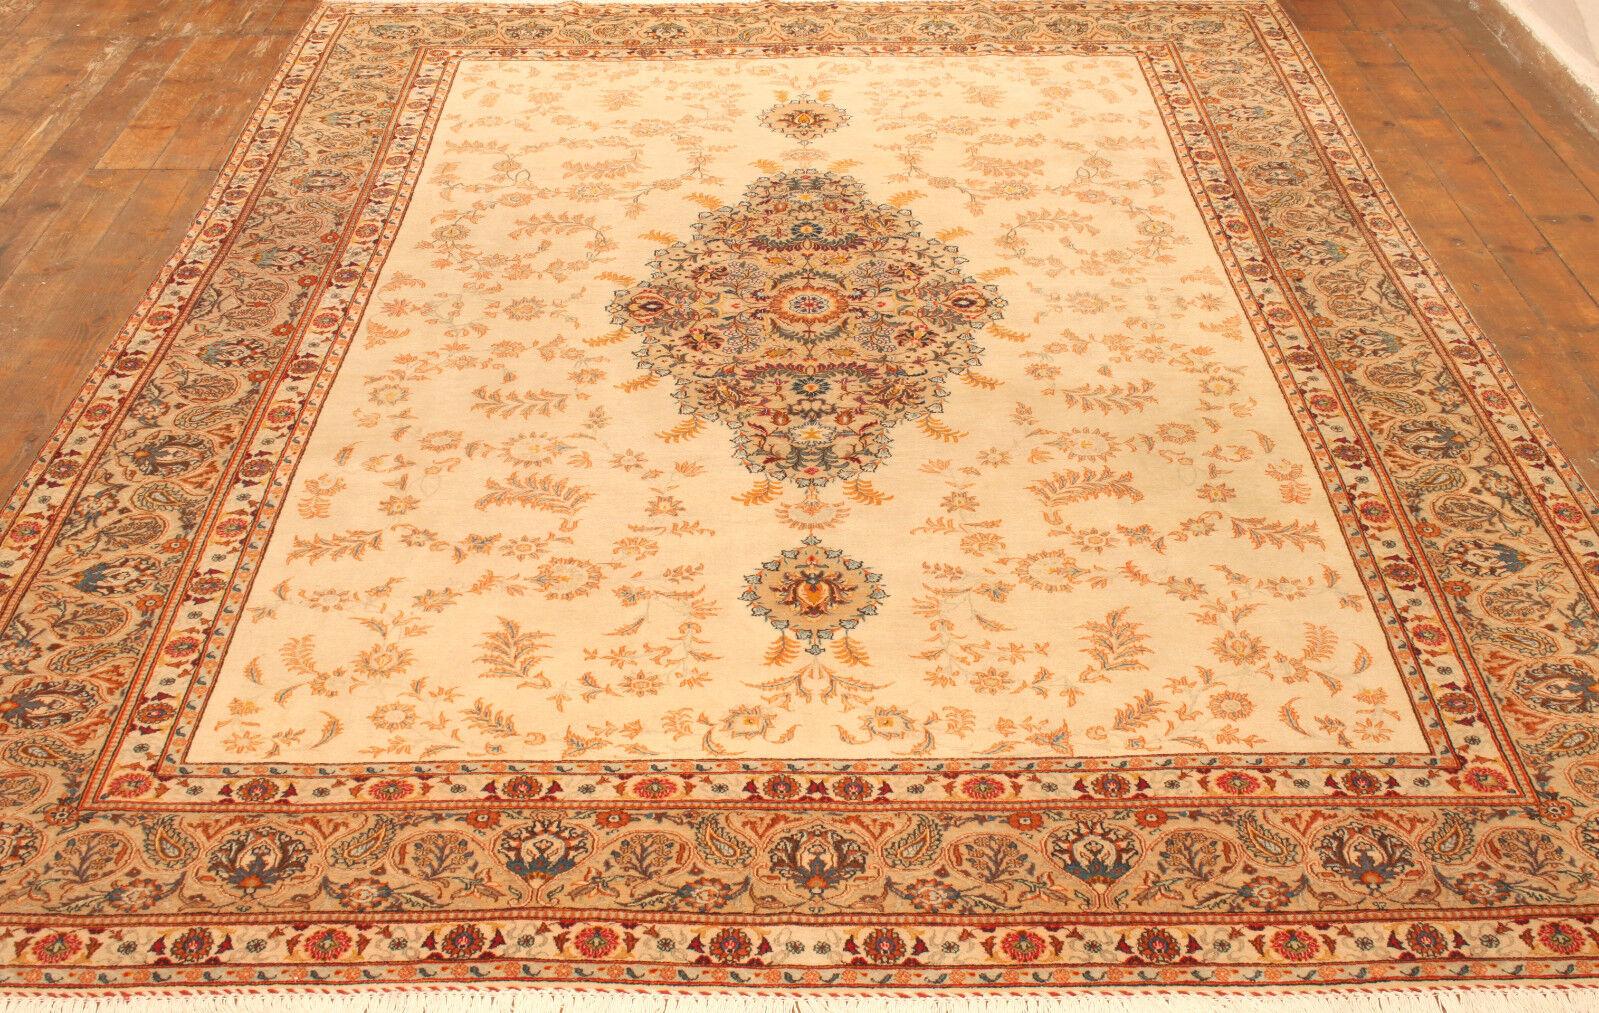 Handmade Contemporary Persian Style Tabriz Rug 8.9' x 12.8', 2000s - 1T05 For Sale 2